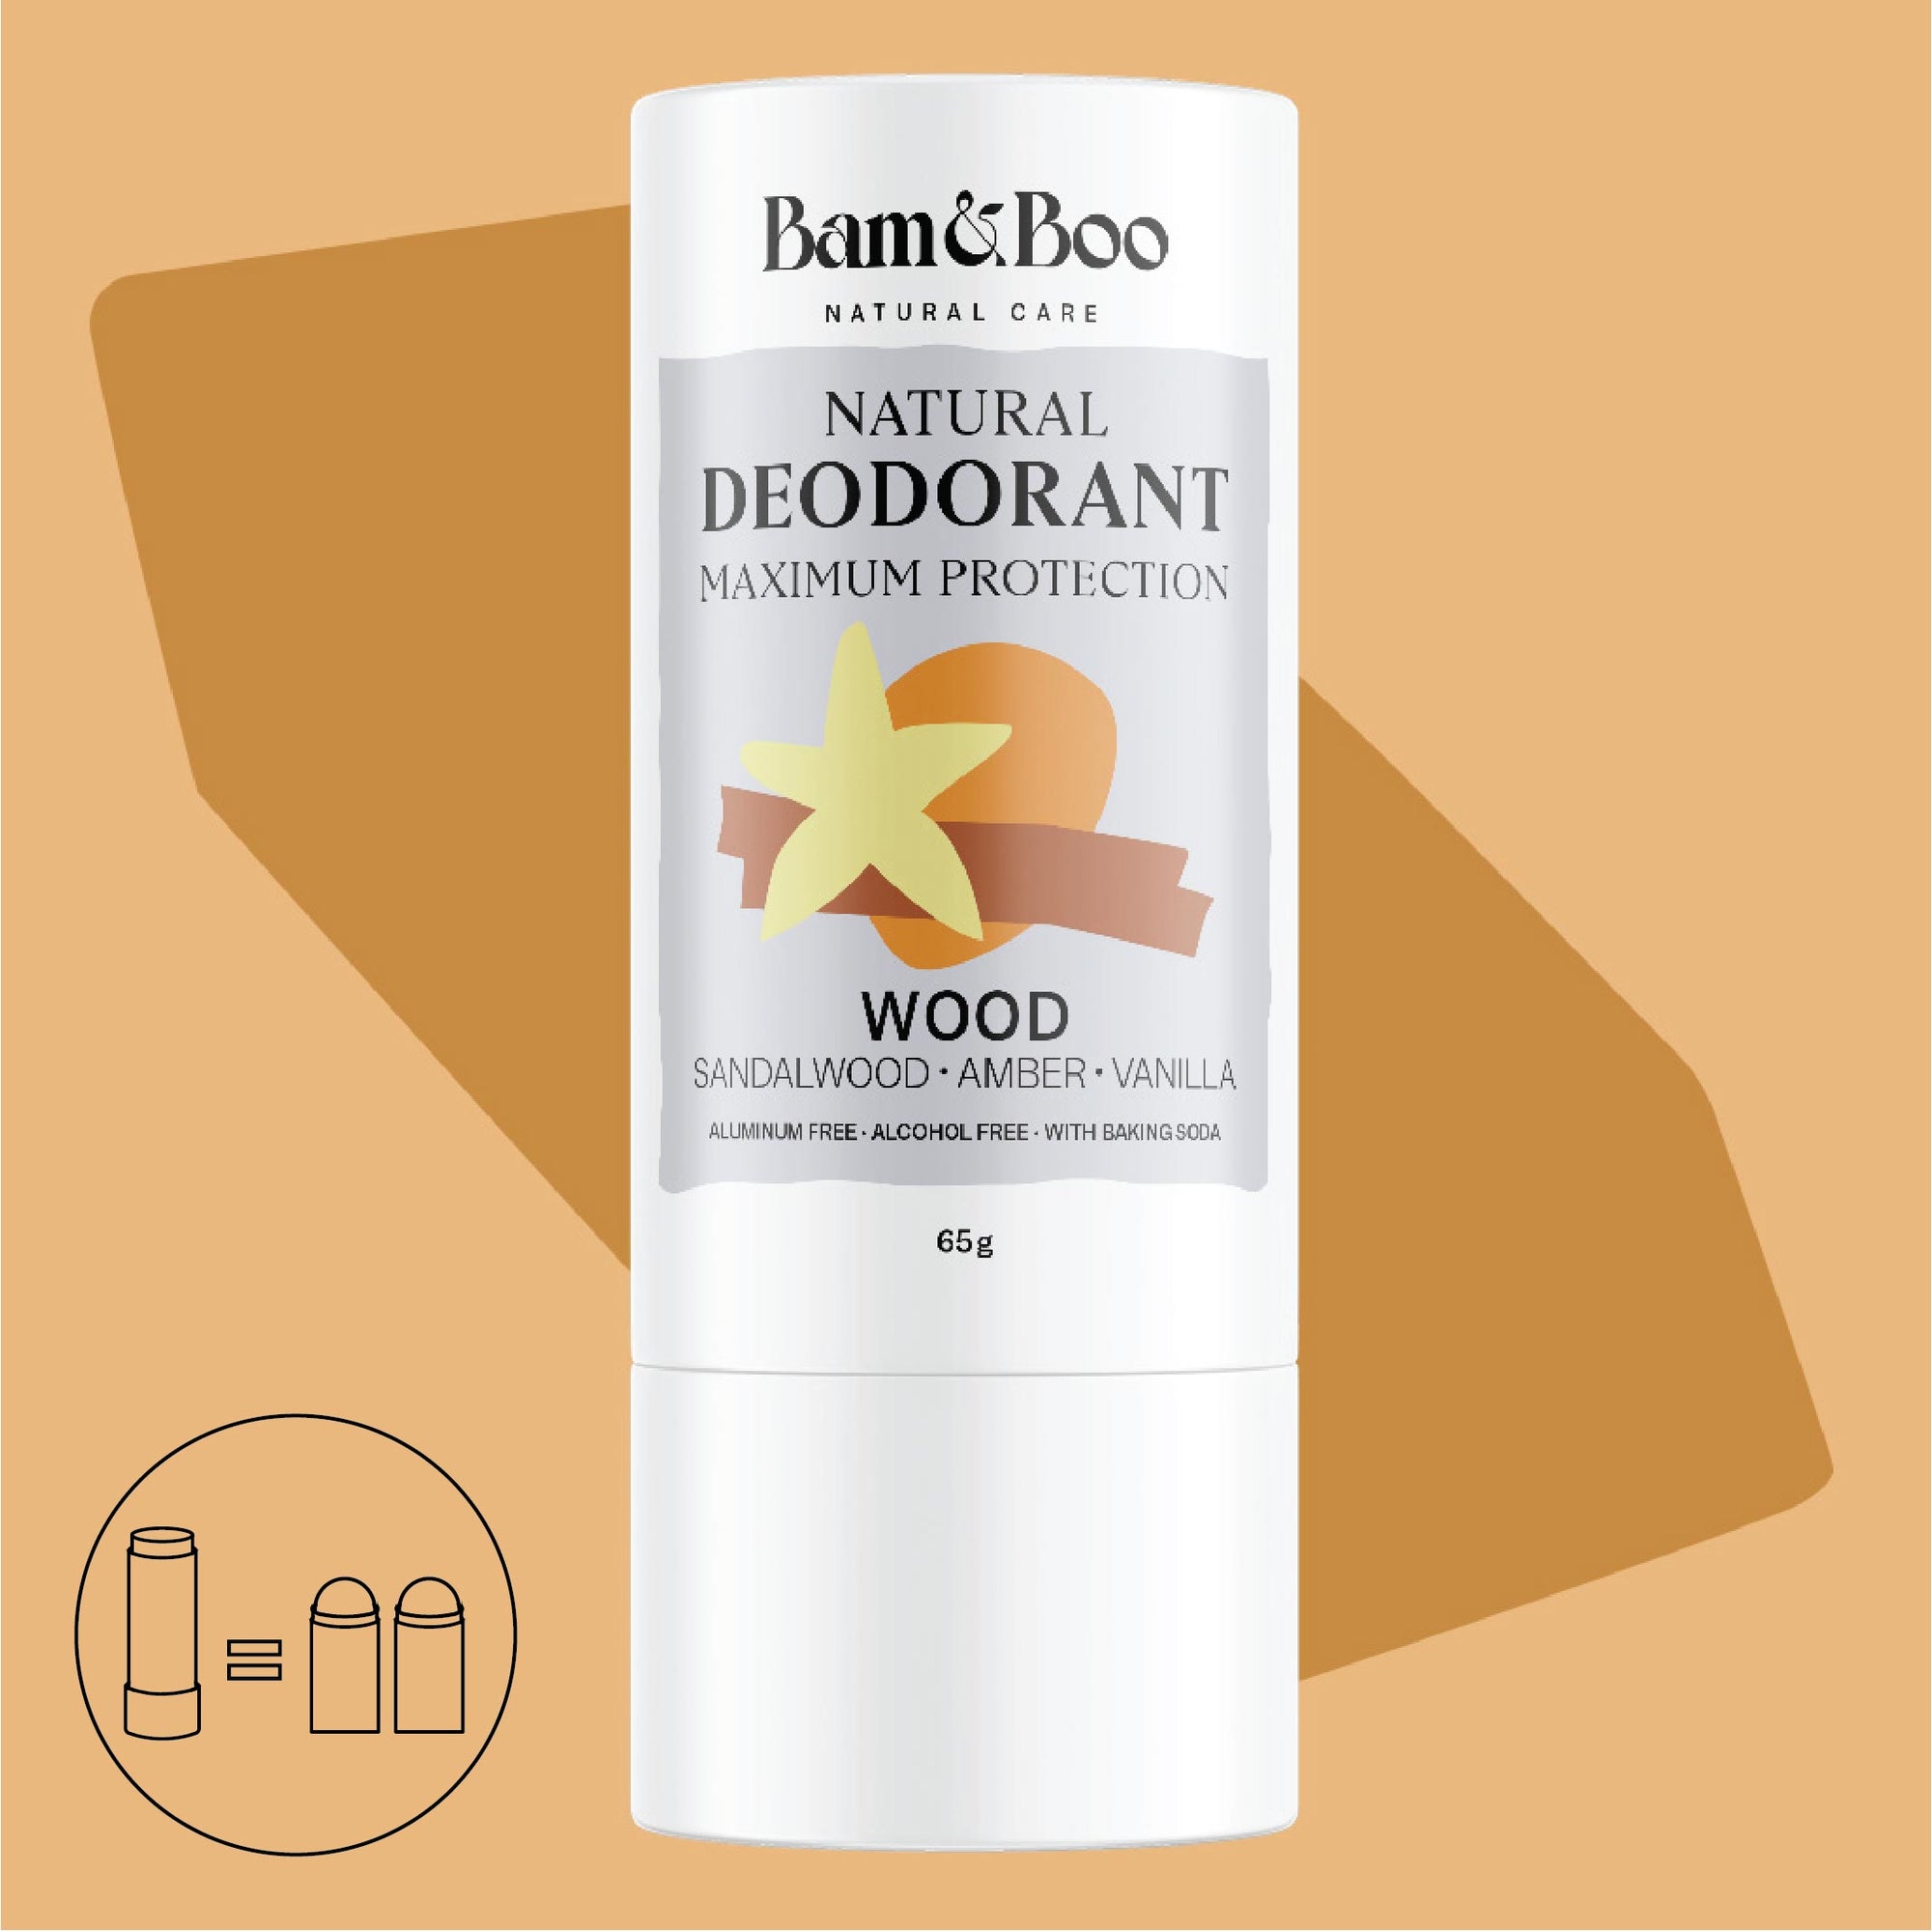 NATURAL DEODORANT | MAXIMUM PROTECTION | Wood - Sandalwood, Amber & Vanilla - Bam&Boo - Eco-friendly, vegan, sustainable oral and personal care